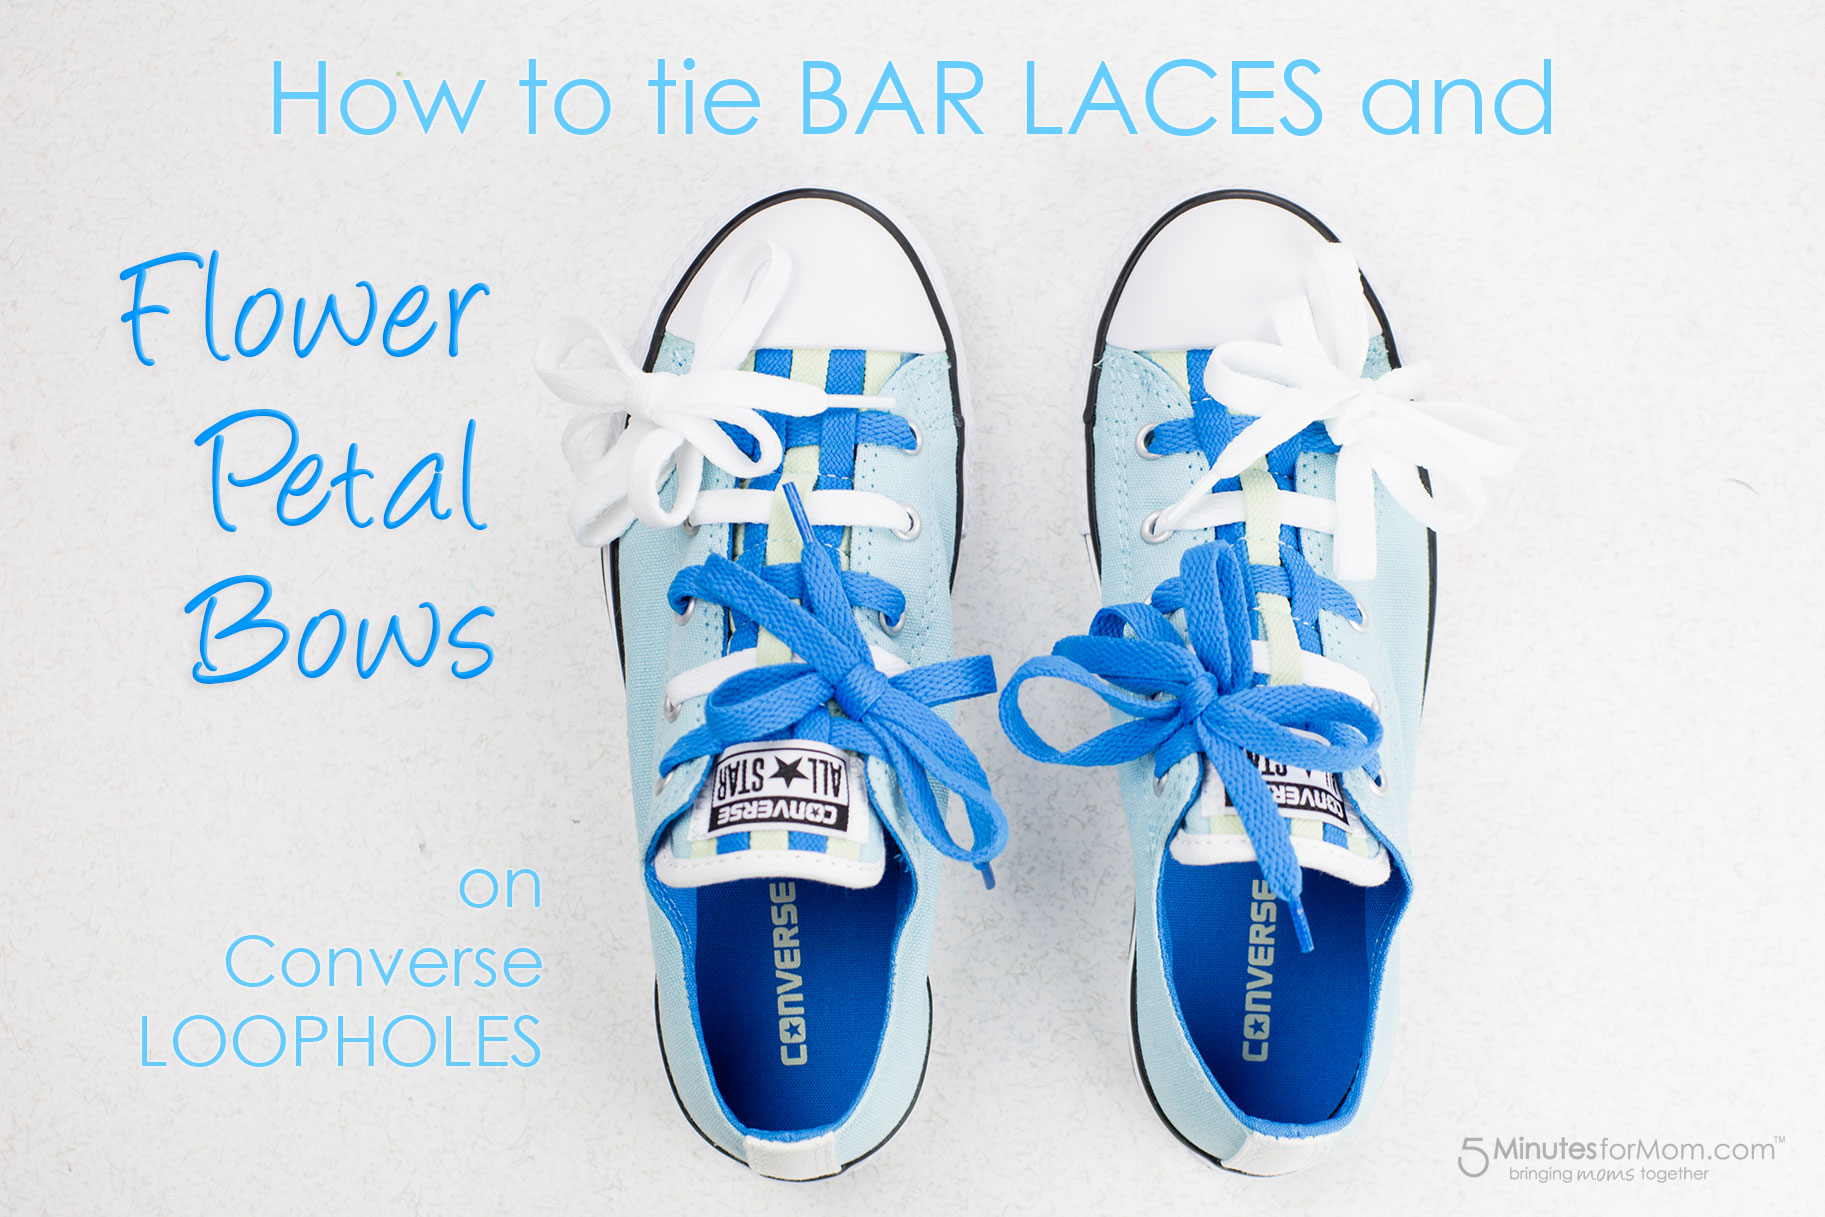 How to Tie Shoelaces on Converse Loopholes with Bar Laces and Bows